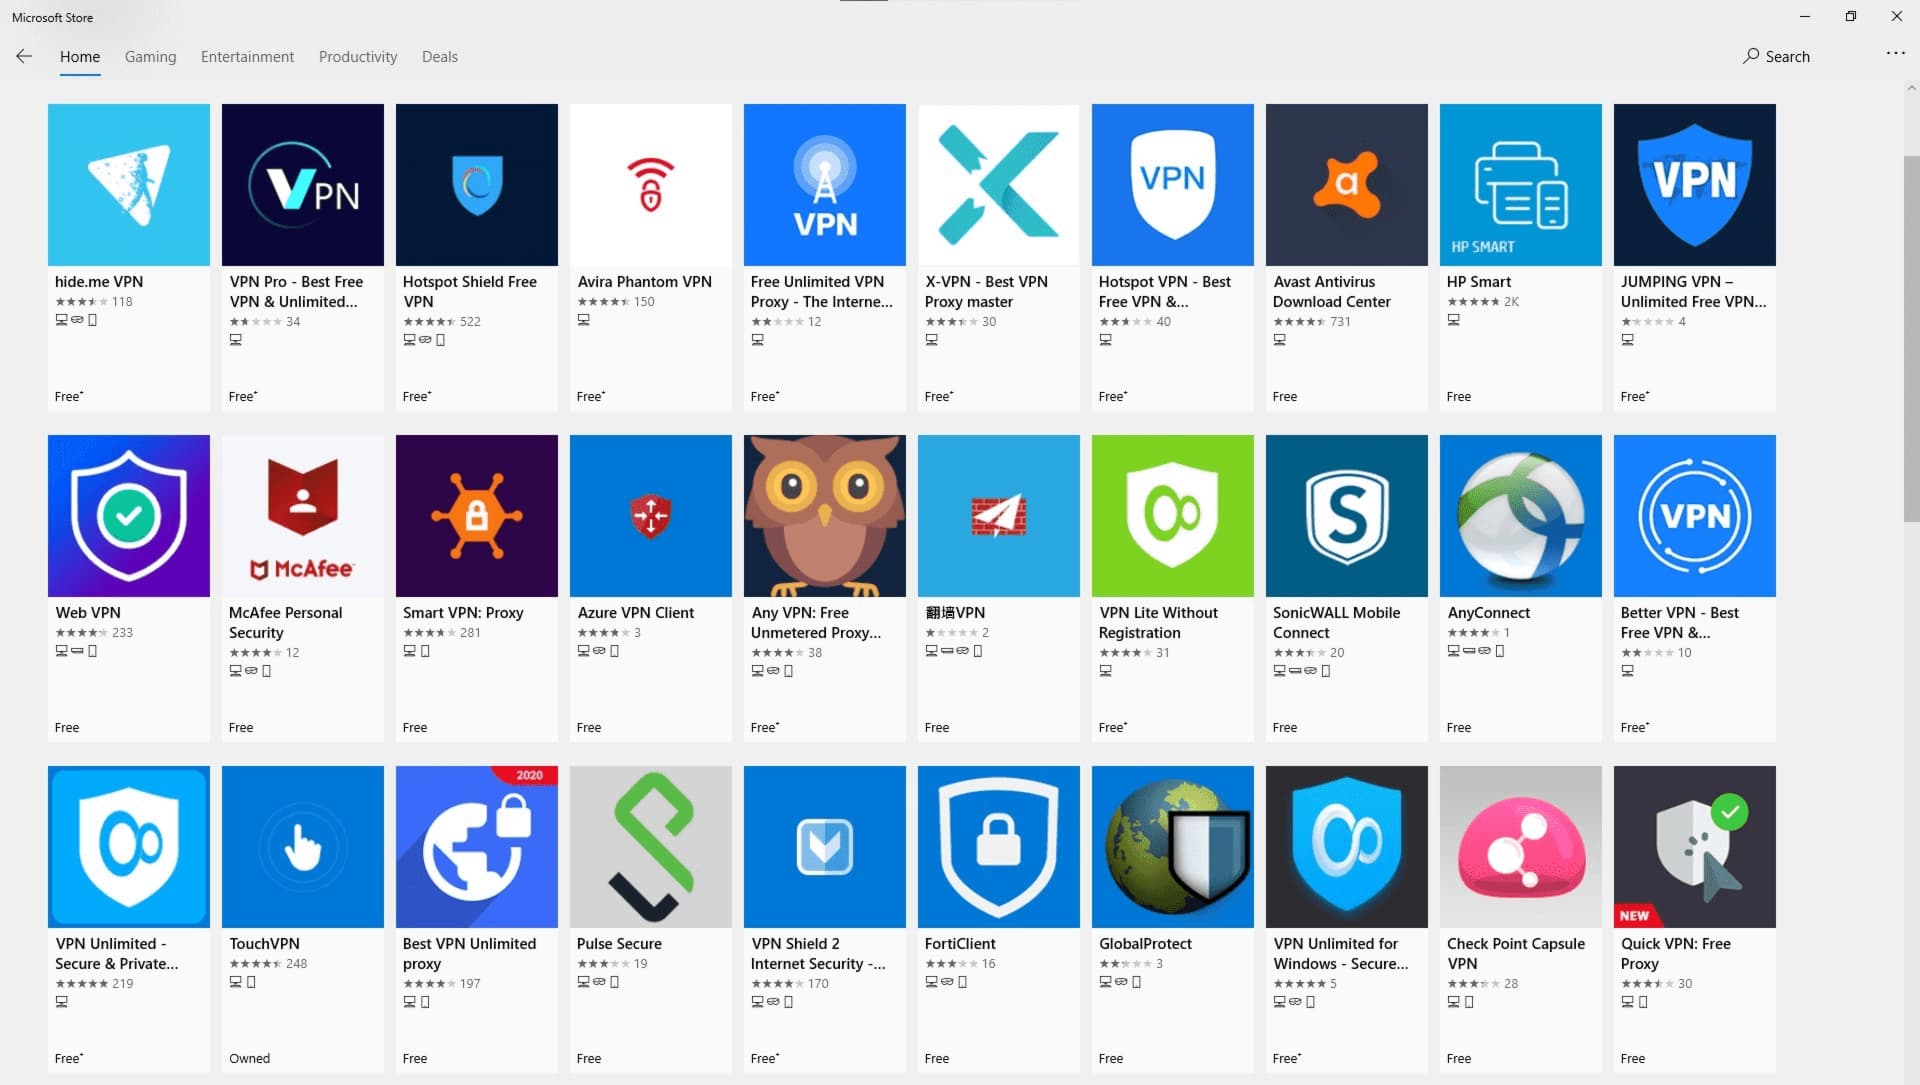 Many popular free VPNs in the Microsoft Store are insecure